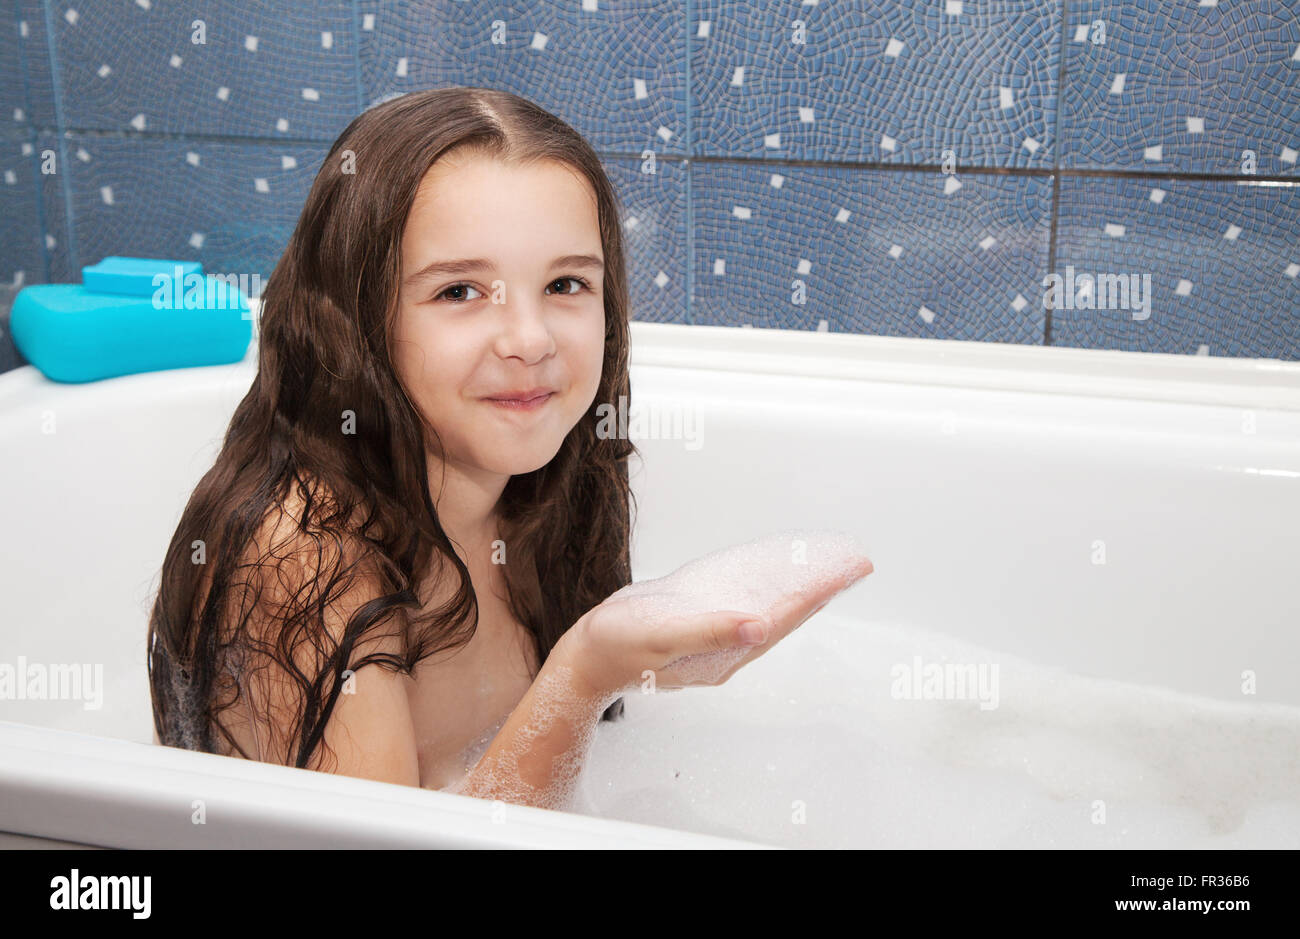 little smiling girl with long brown hair taking a bath with shampoo ...